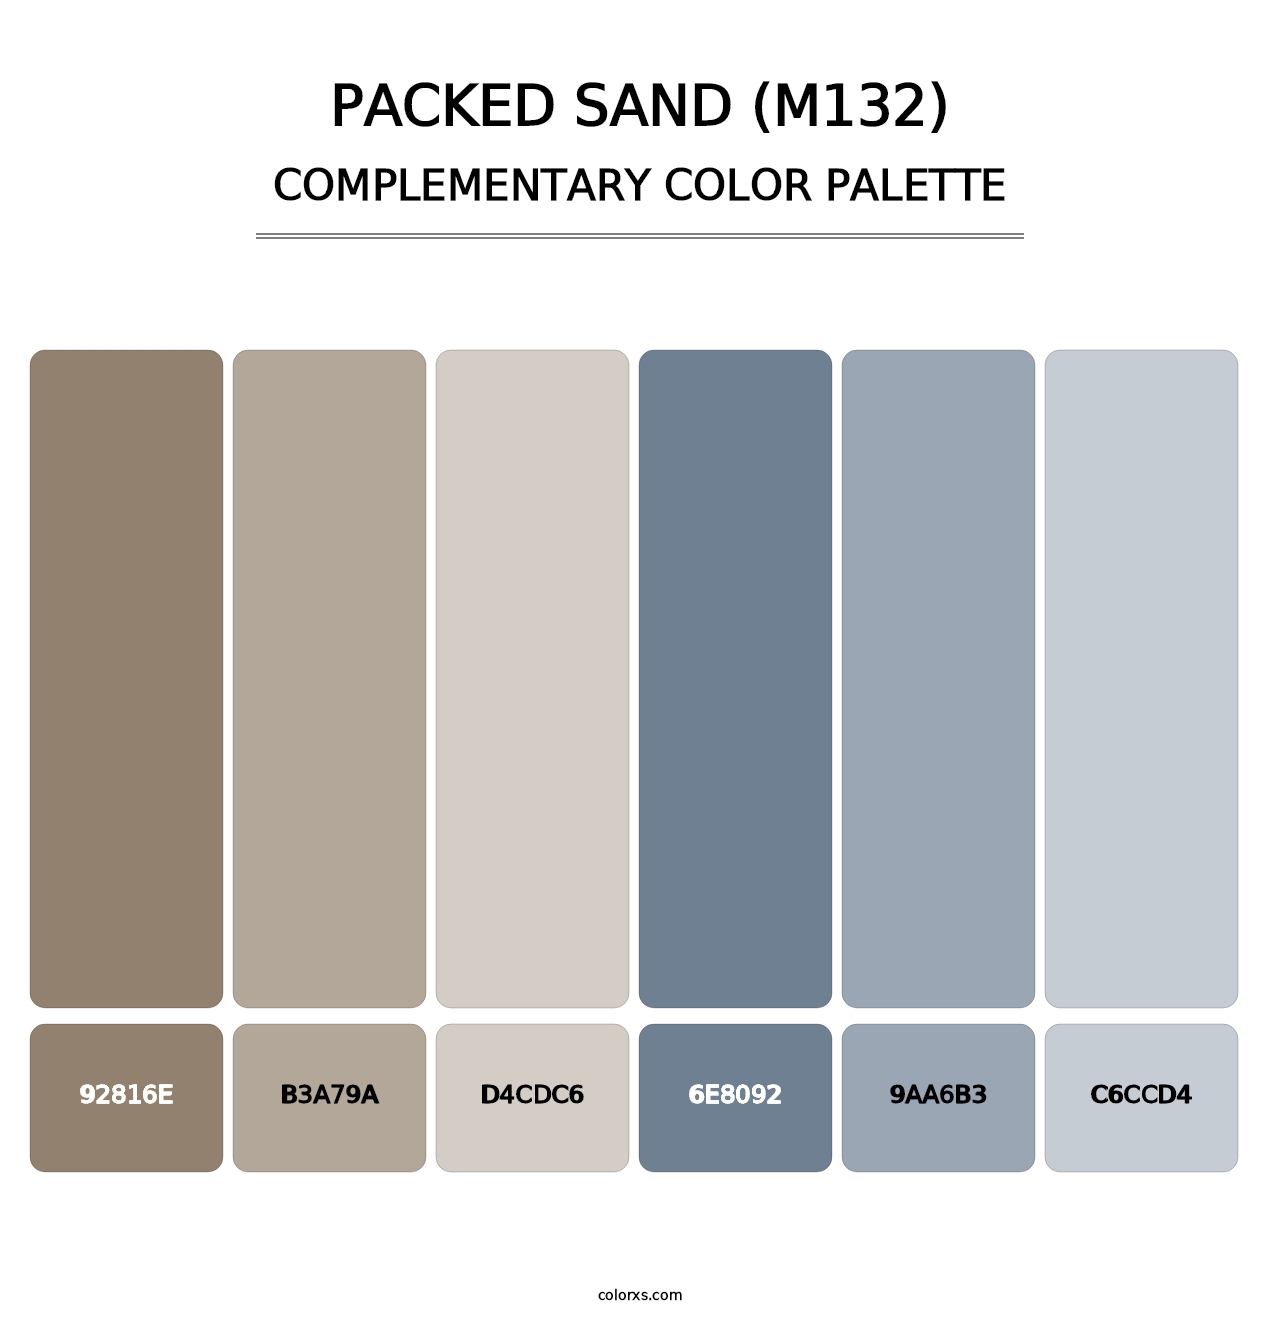 Packed Sand (M132) - Complementary Color Palette